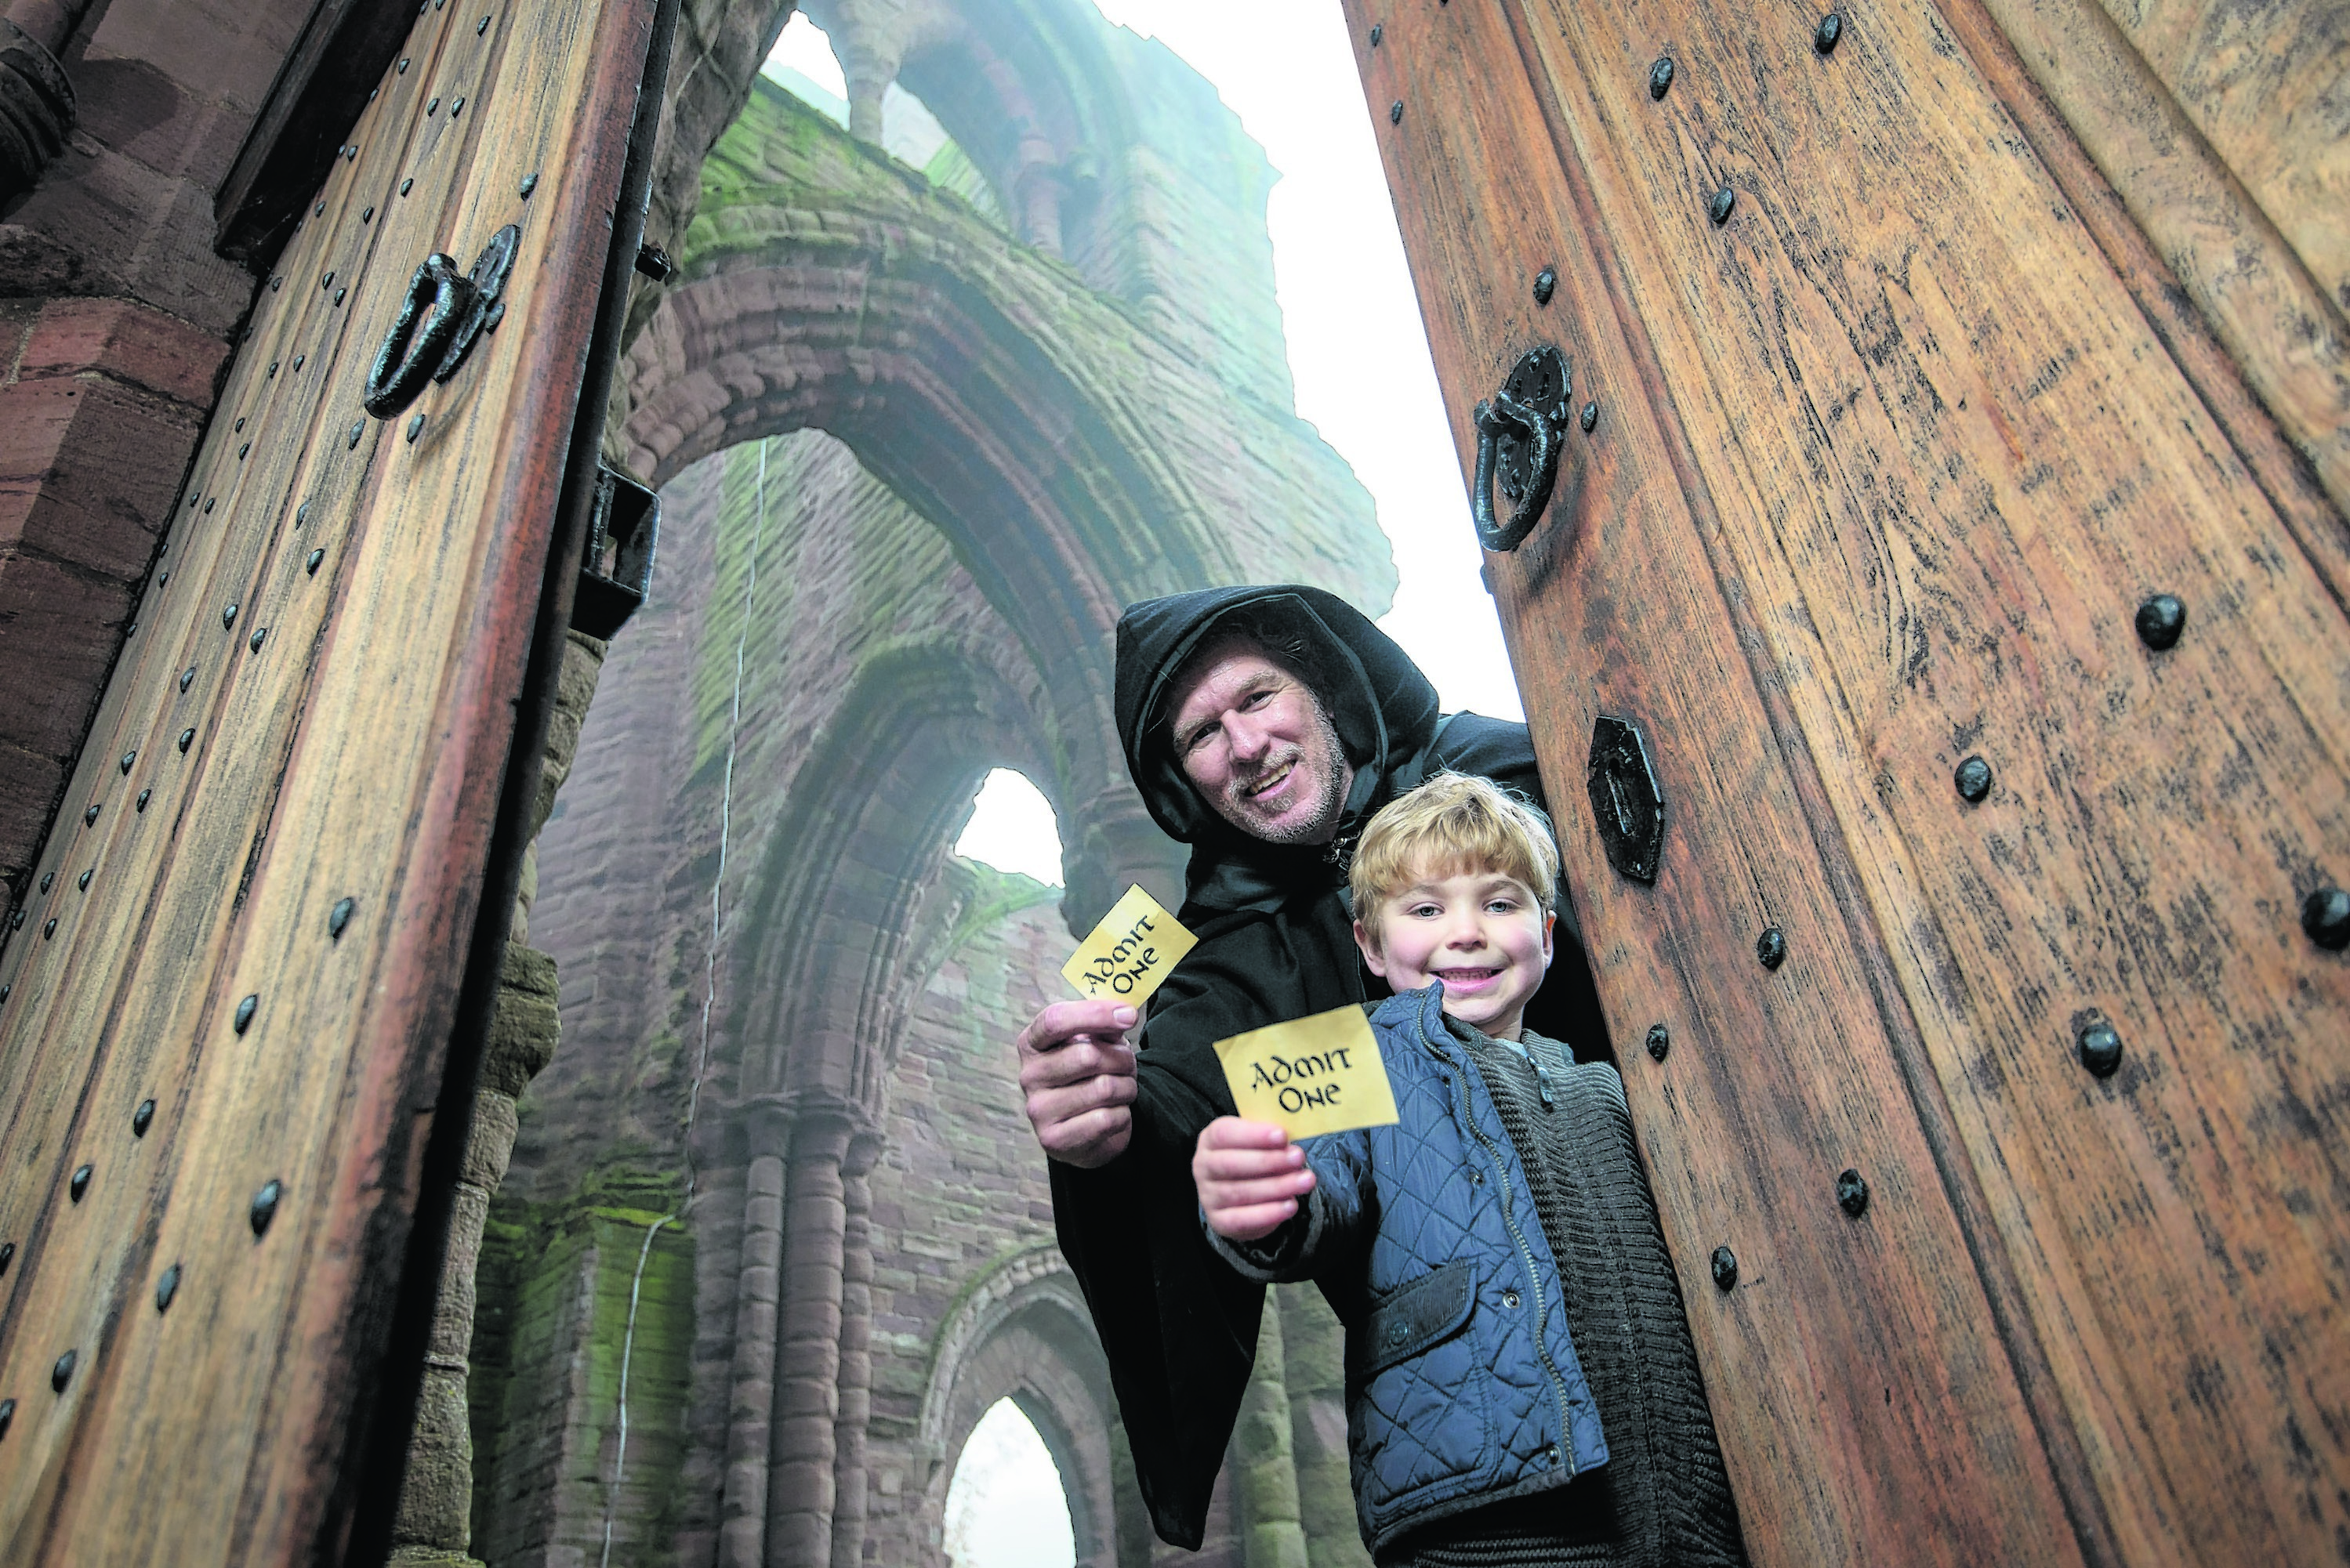 Bruce Fraser, 5, from Dundee, is shown around Arbroath Abbey by one of the monks from its past (played by Marcus McLeod) to help launch this year’s Ticket Giveaway weekend, which takes place this Saturday and Sunday, November 28 and 29. Photo: Historic Scotland